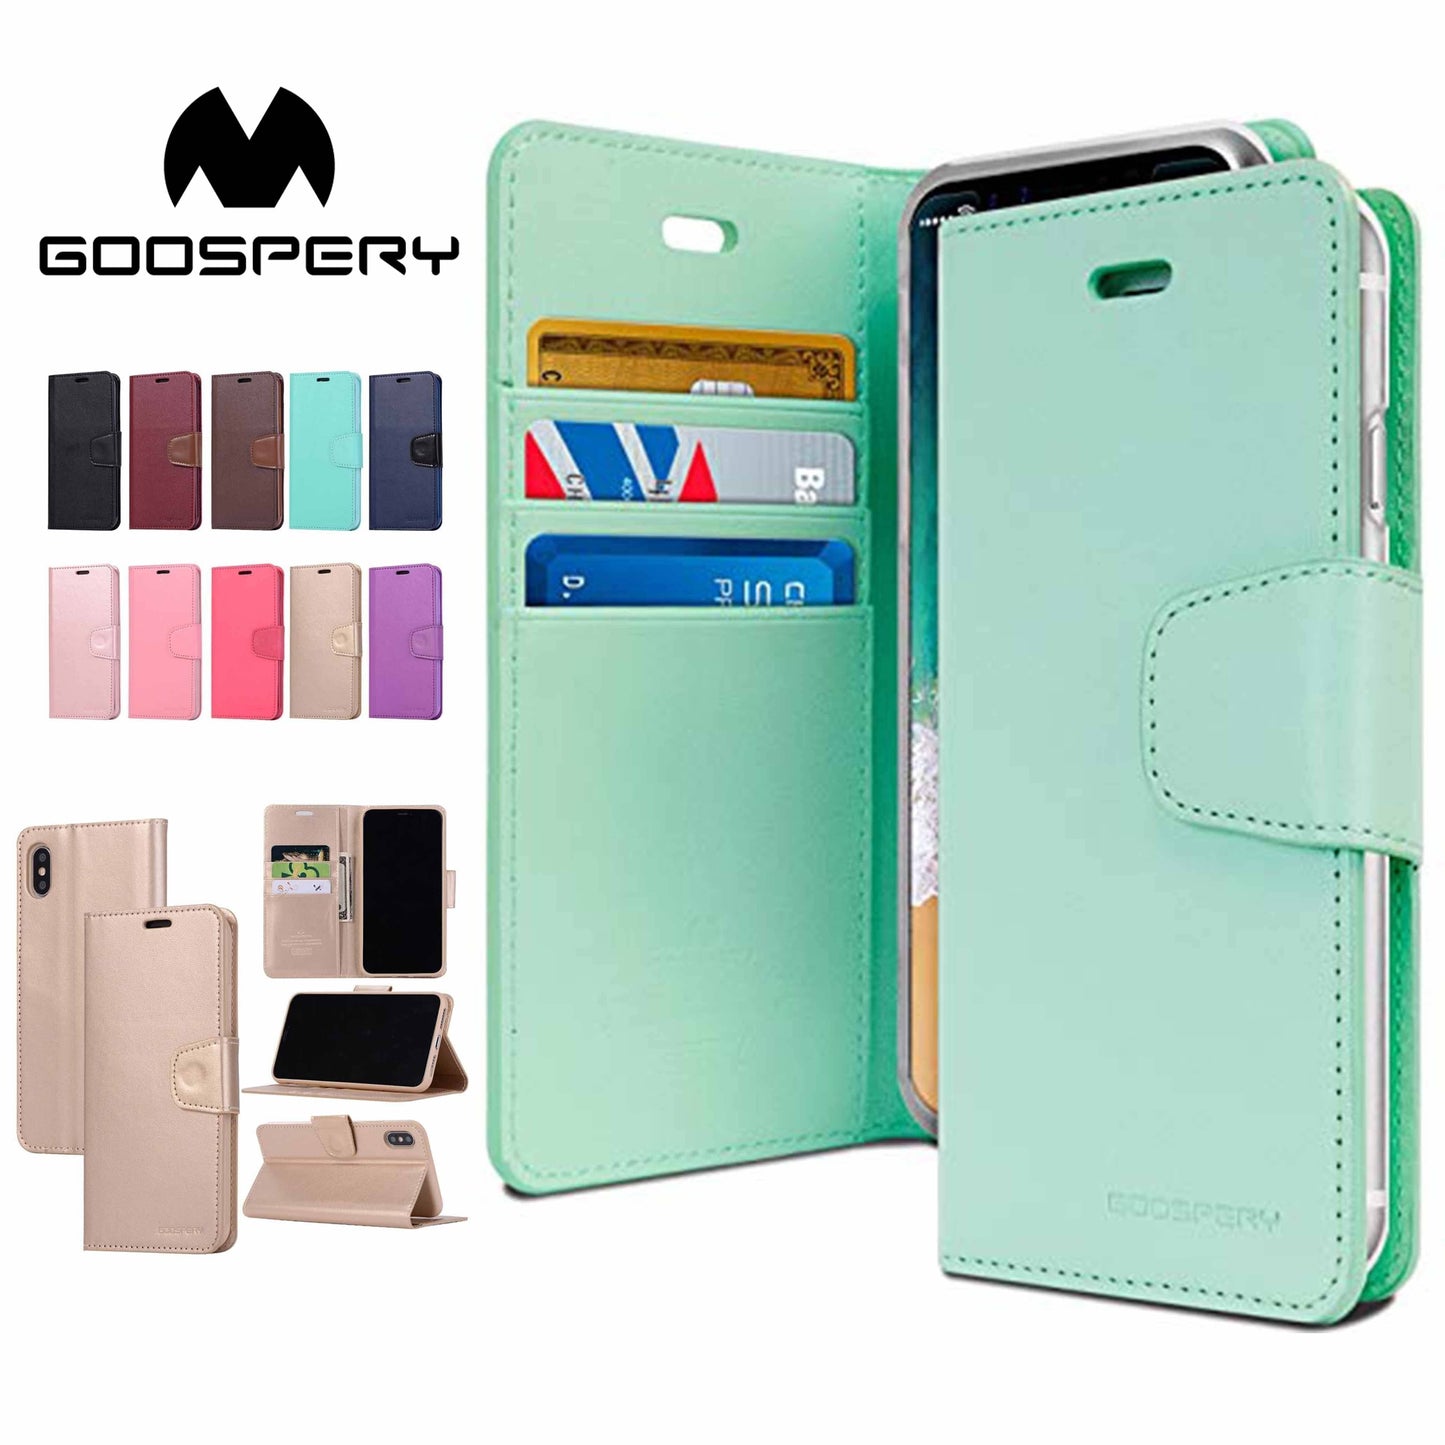 Goospery Sonata Diary Case for iPhone Xs Max Xr Wallet Flip Cards Faux Leather-Phone Case-Goospery-www.PhoneGuy.com.au